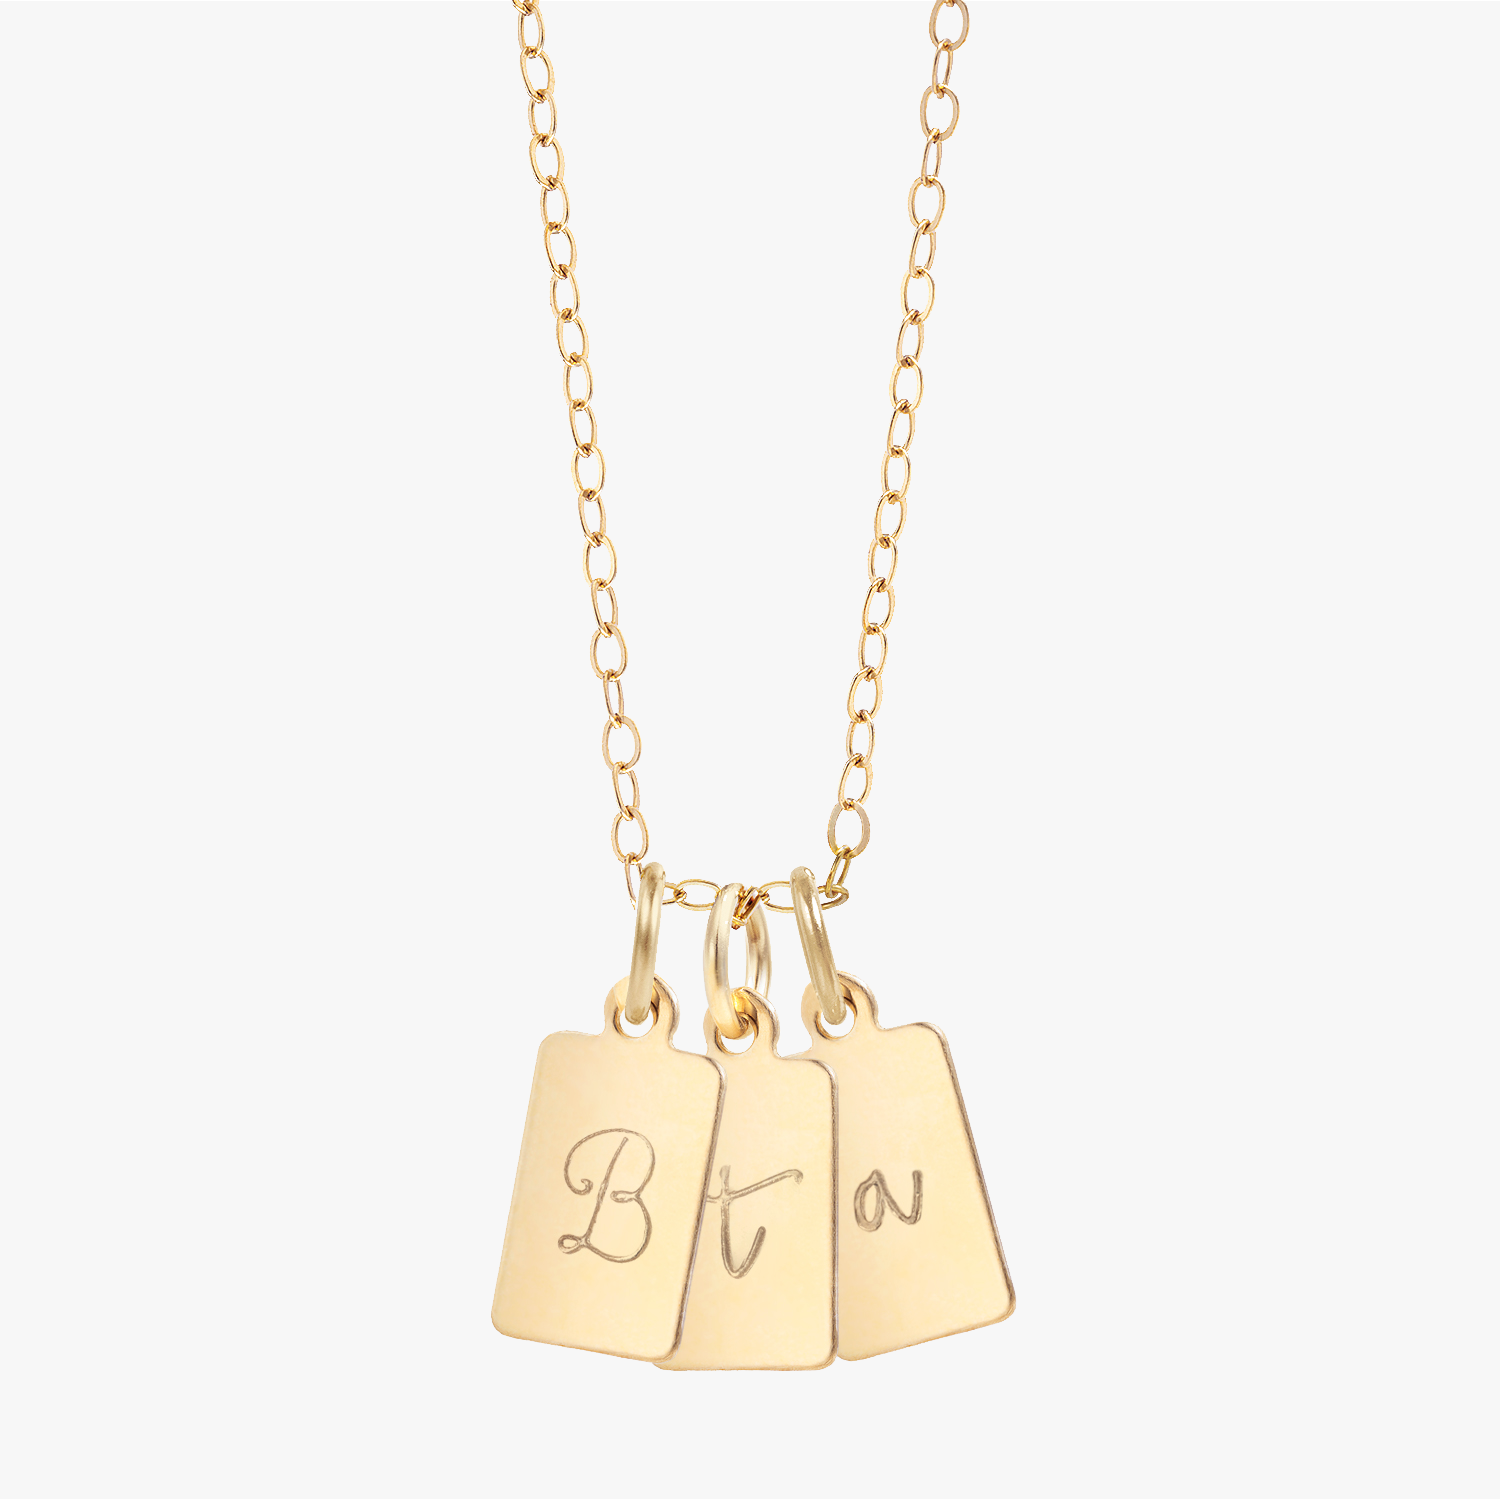 Personalized Tag Initial Necklace